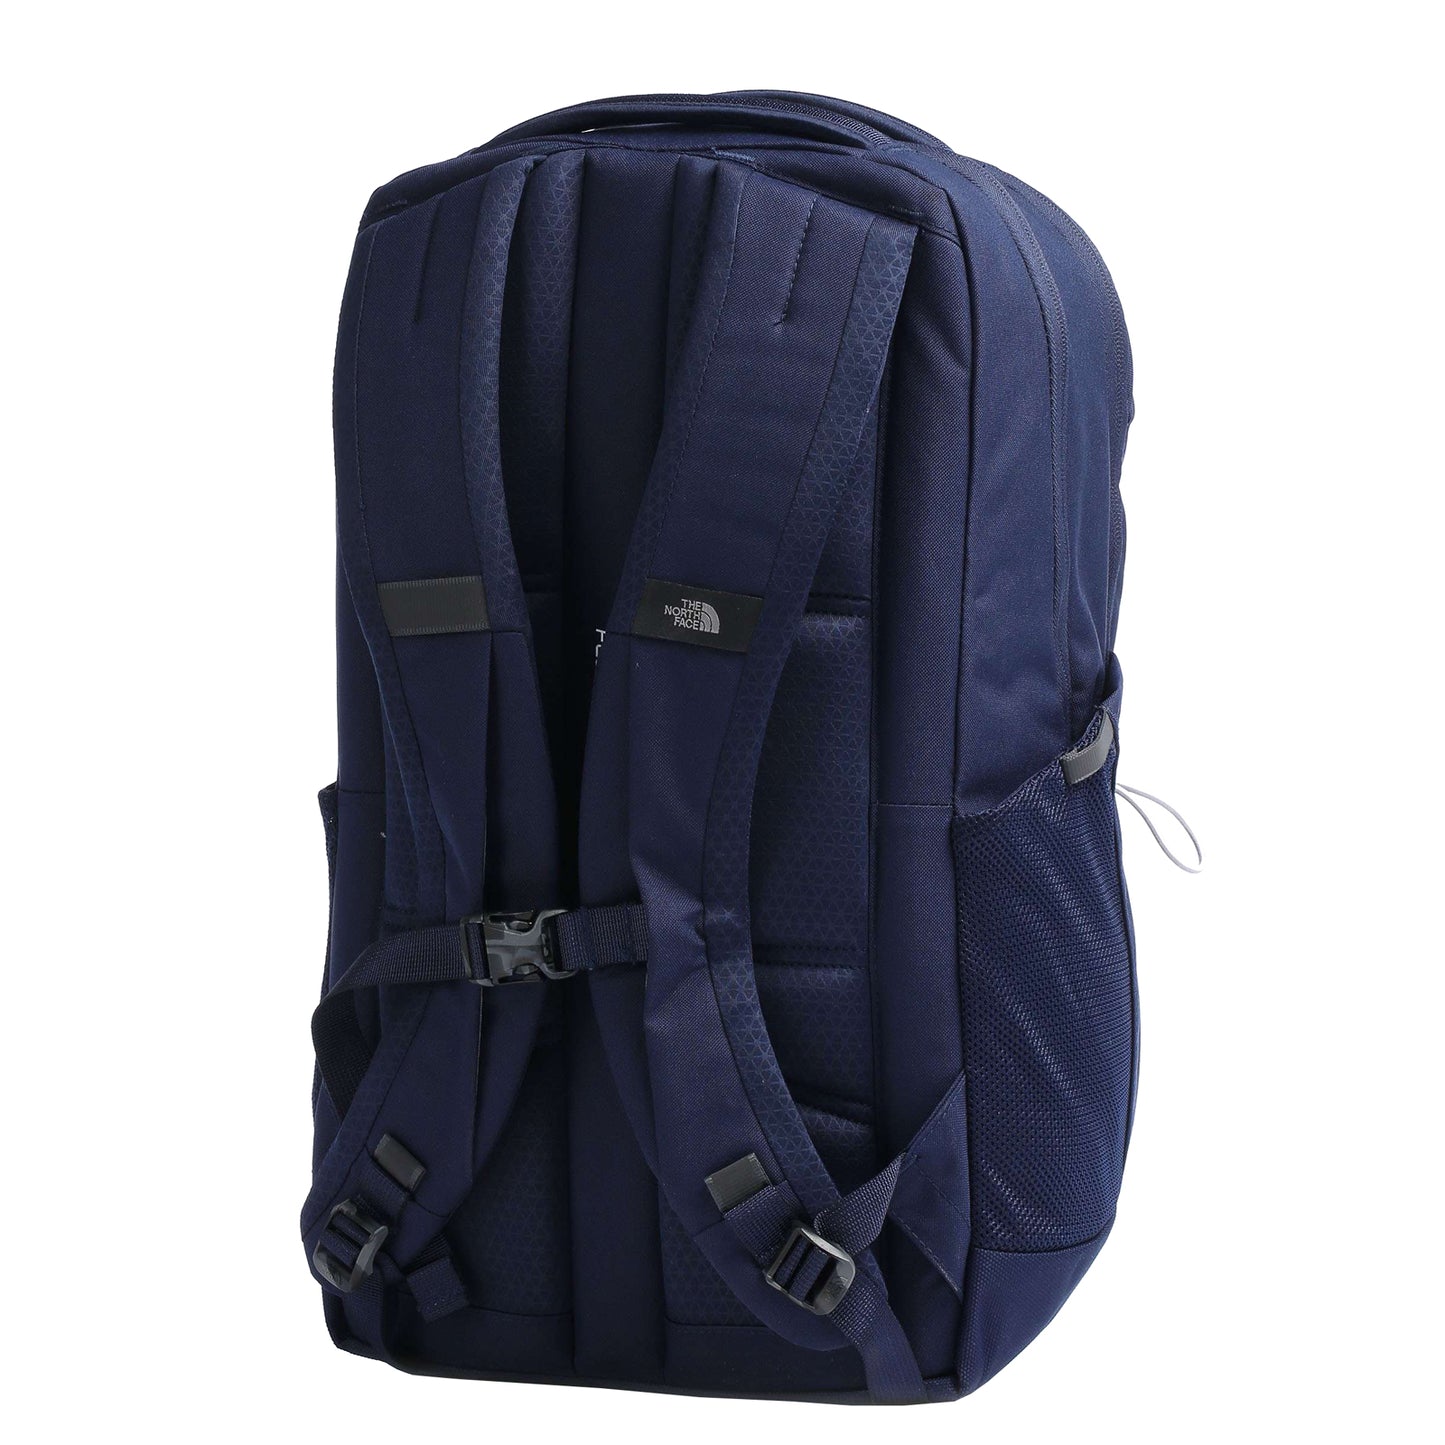 The North Face Jester Backpack TNF Navy/Meld Grey